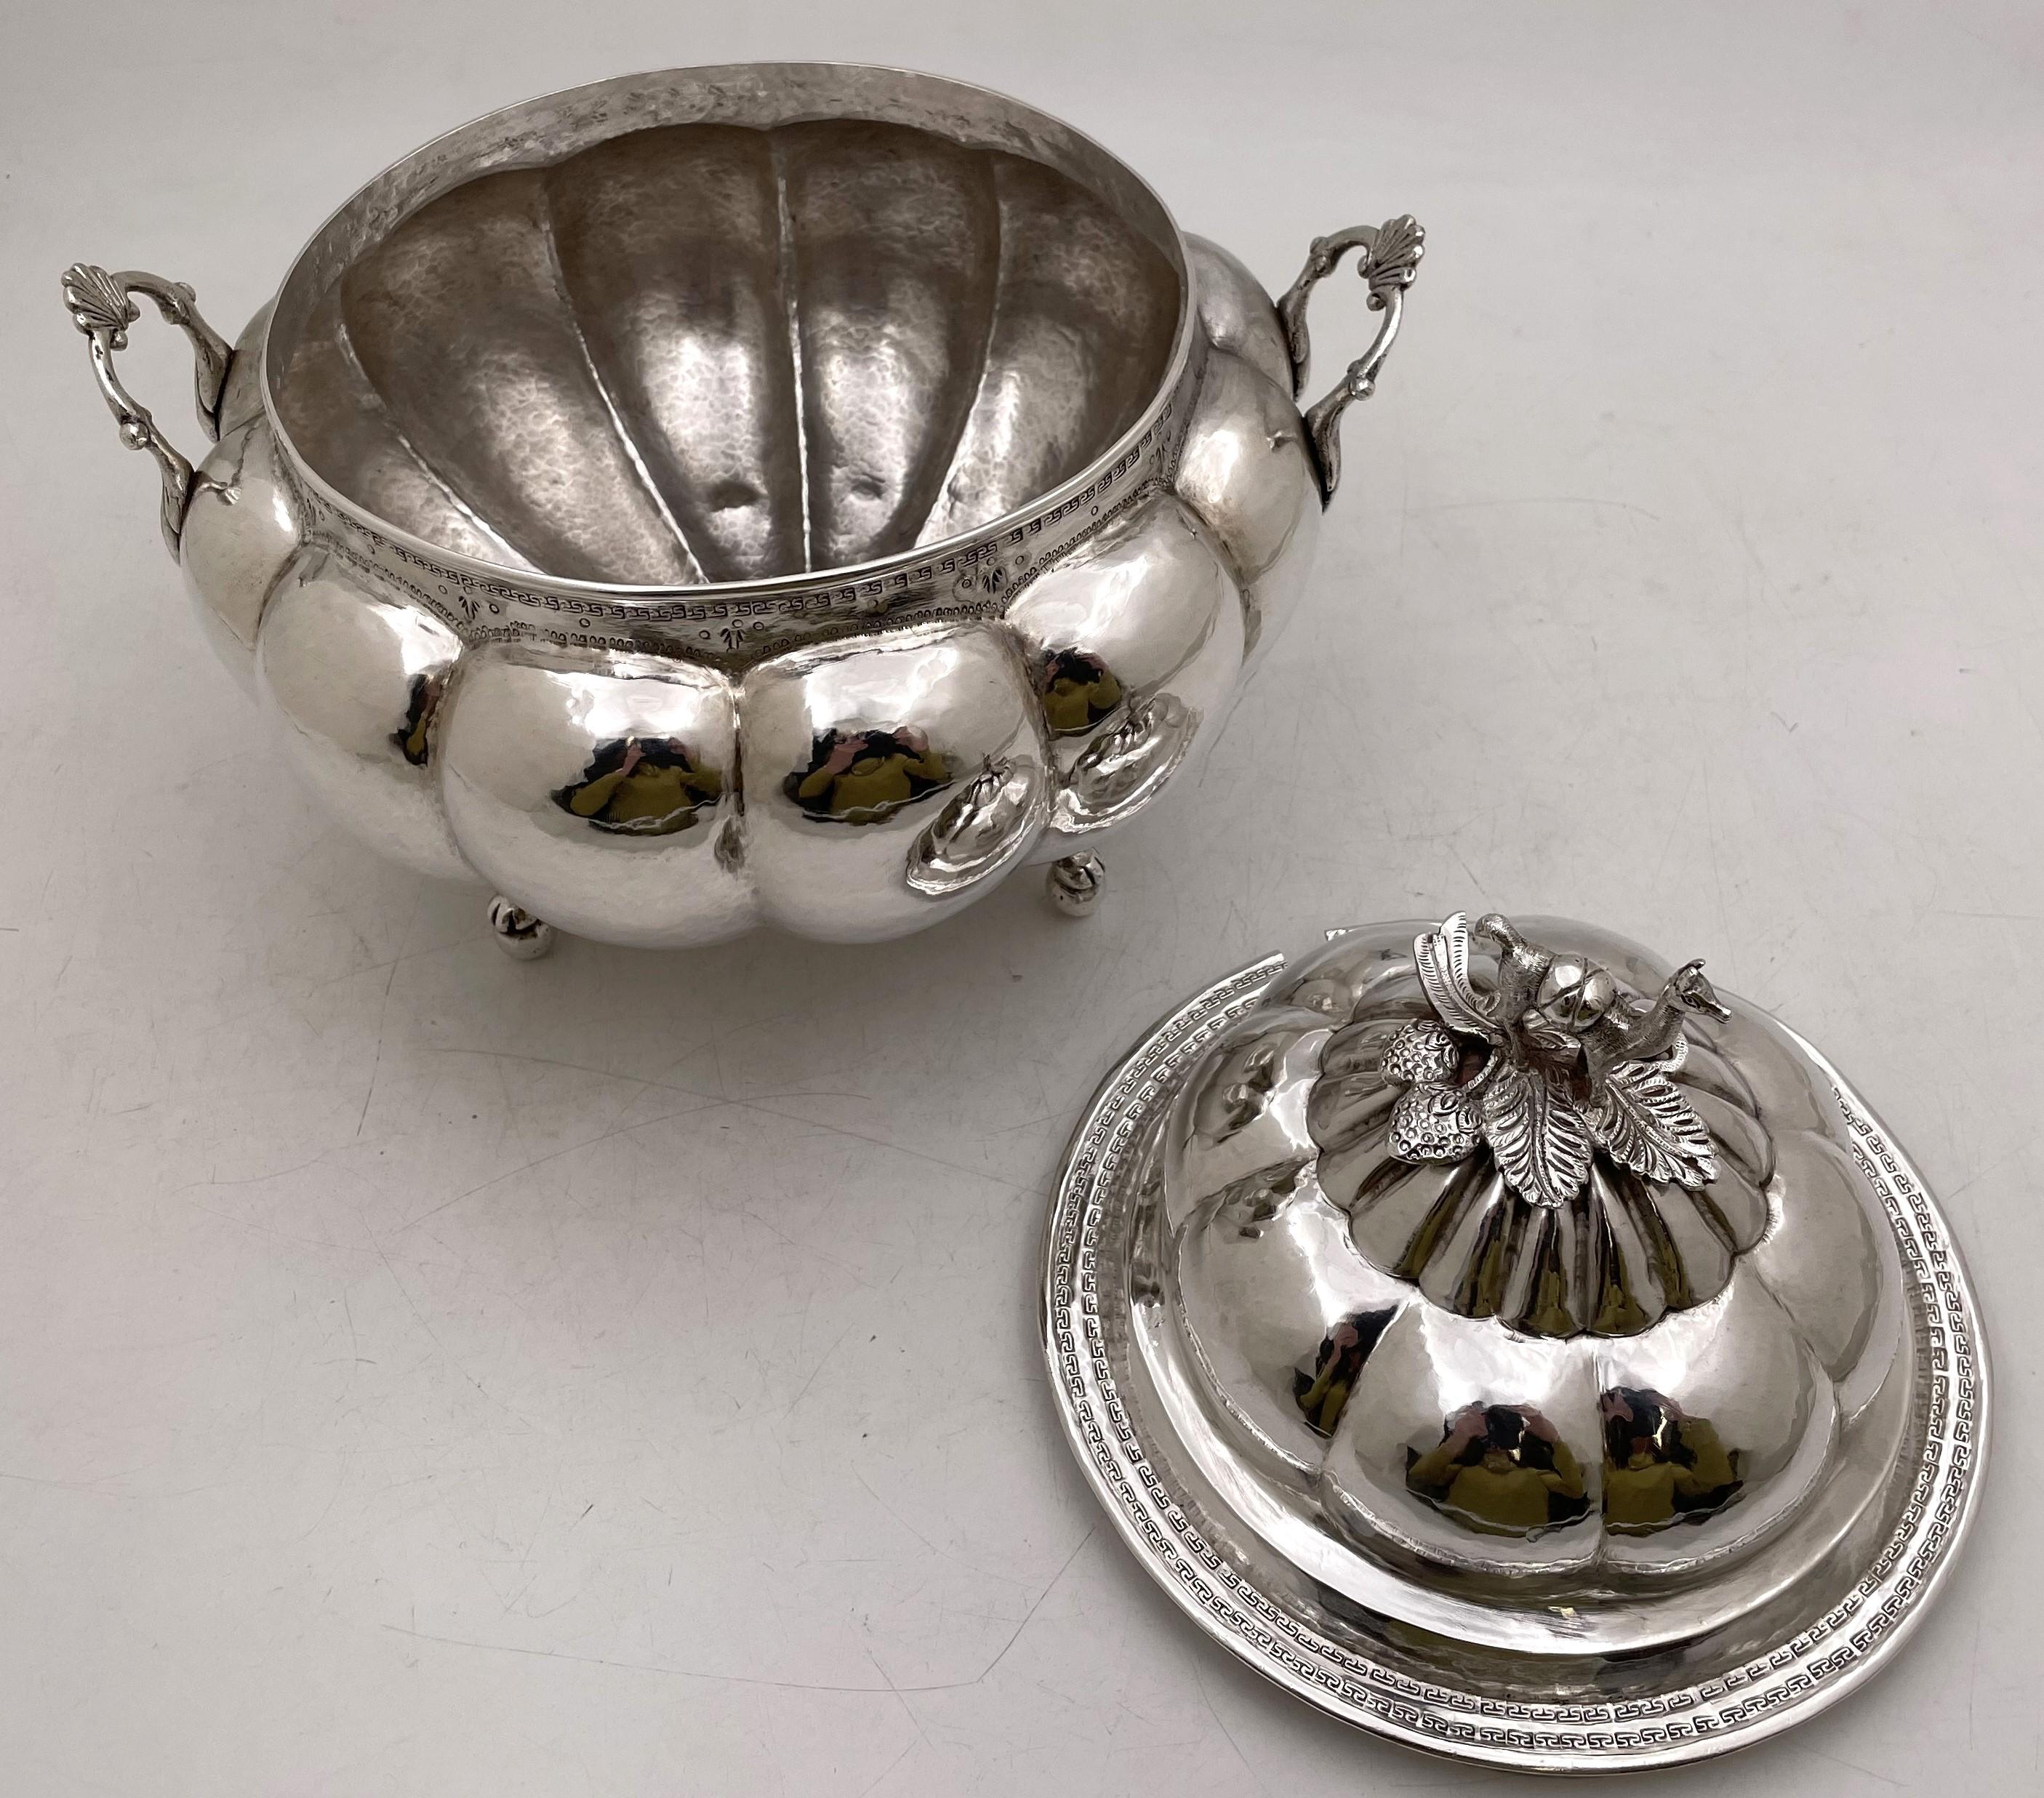 Latin American, probably Peruvian, silver tureen with a cover, from the 19th century, hand chased, in a circular shape, standing on 3 paw and ball feet, and with a camel finial. It measures 10 3/4'' in height with the lid (6'' without) by 10'' in